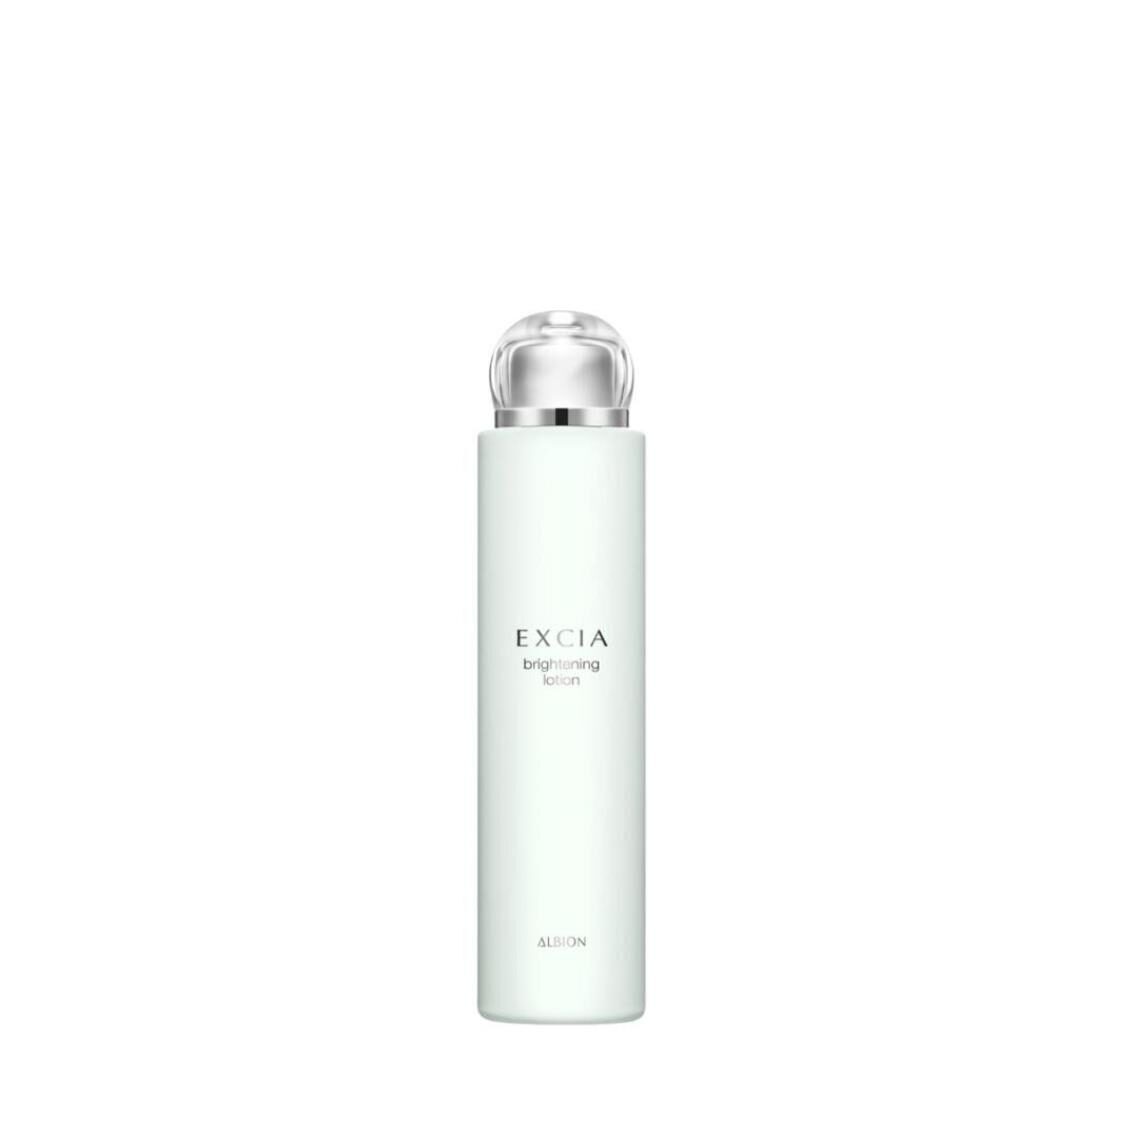 Albion EXCIA Brightening Lotion 200ml